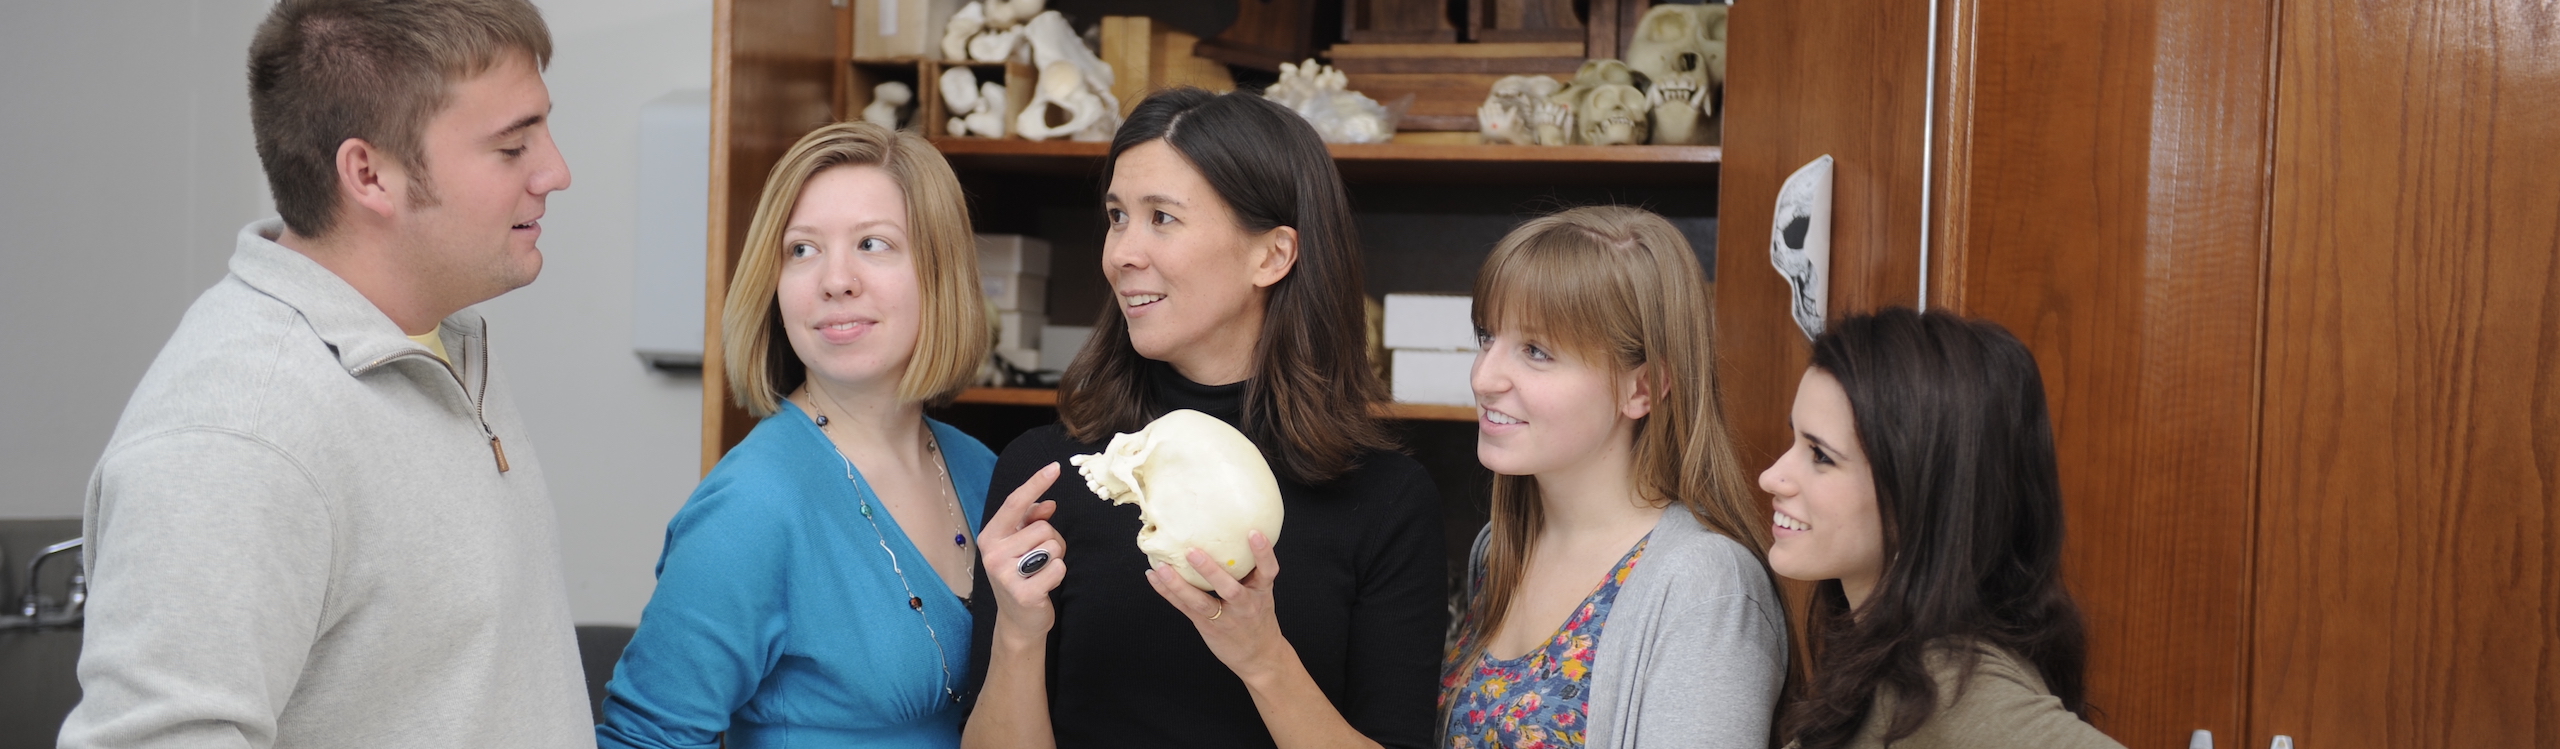 professor showing a skull to a group of students